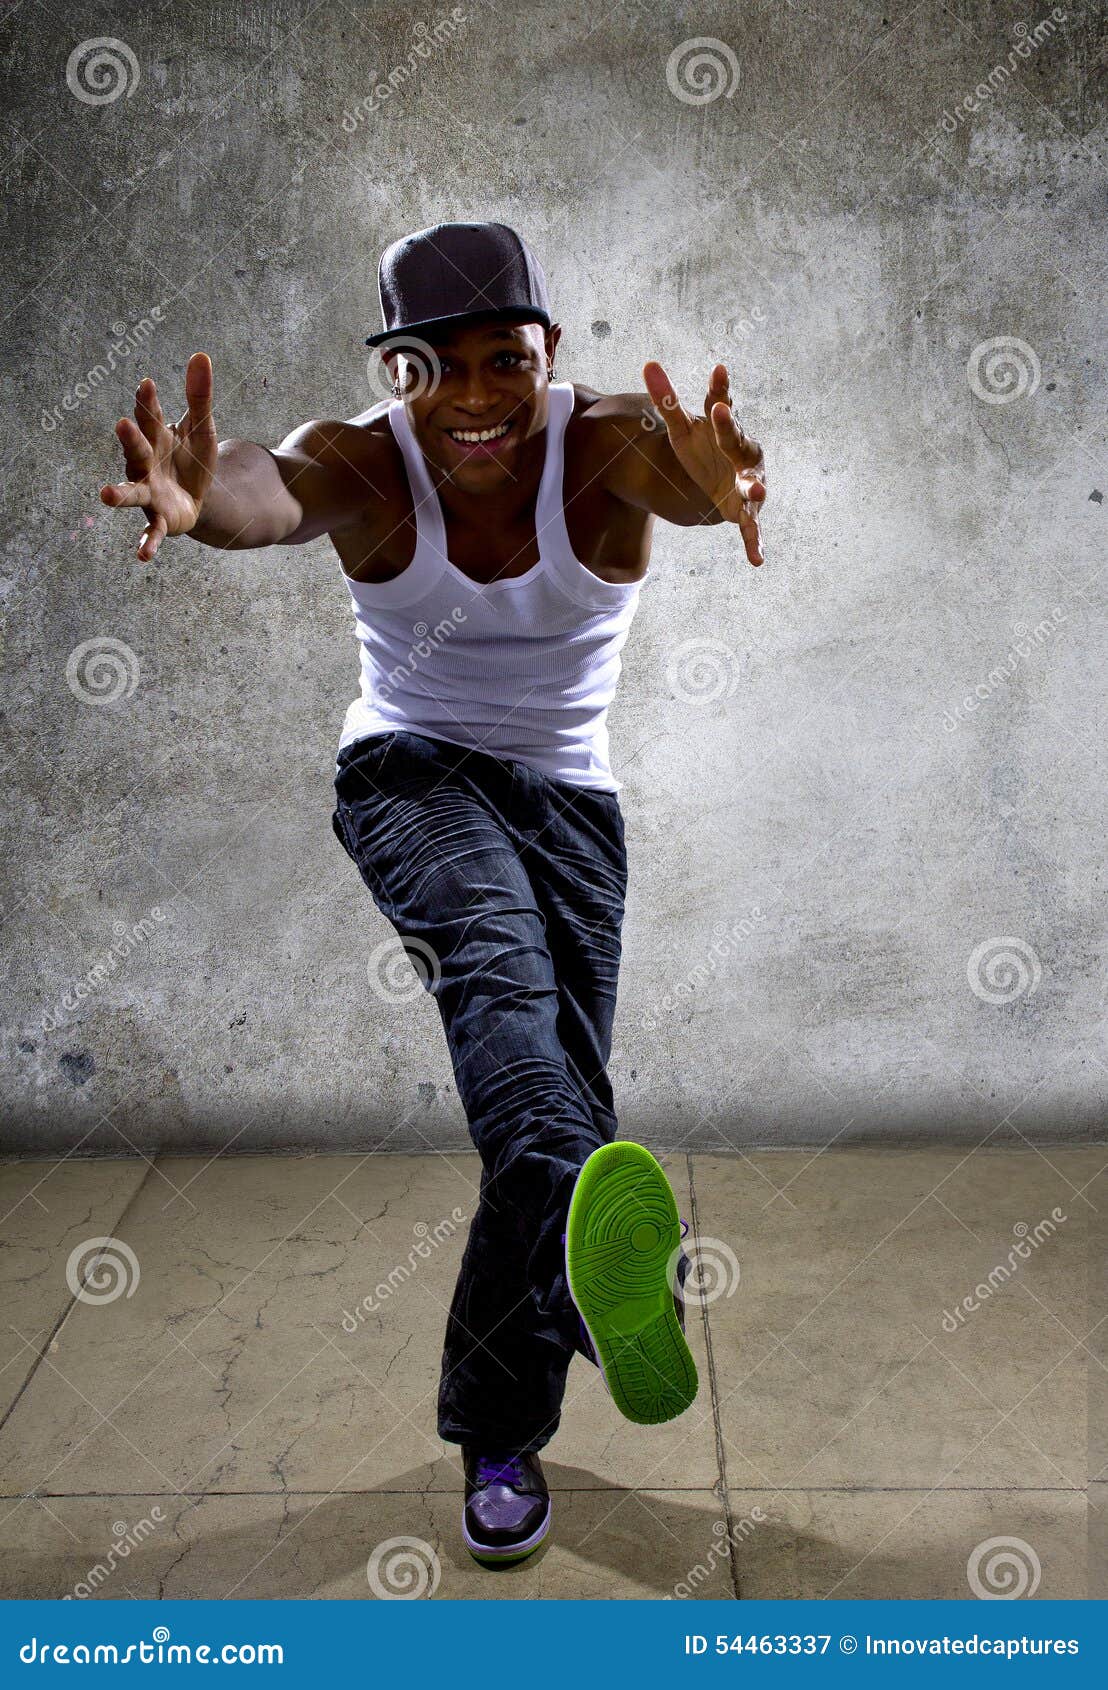 8 Fun Hip Hop Poses for Pictures - Dance Studio Photography | Dance picture  poses, Hip hop dance photography, Dance poses